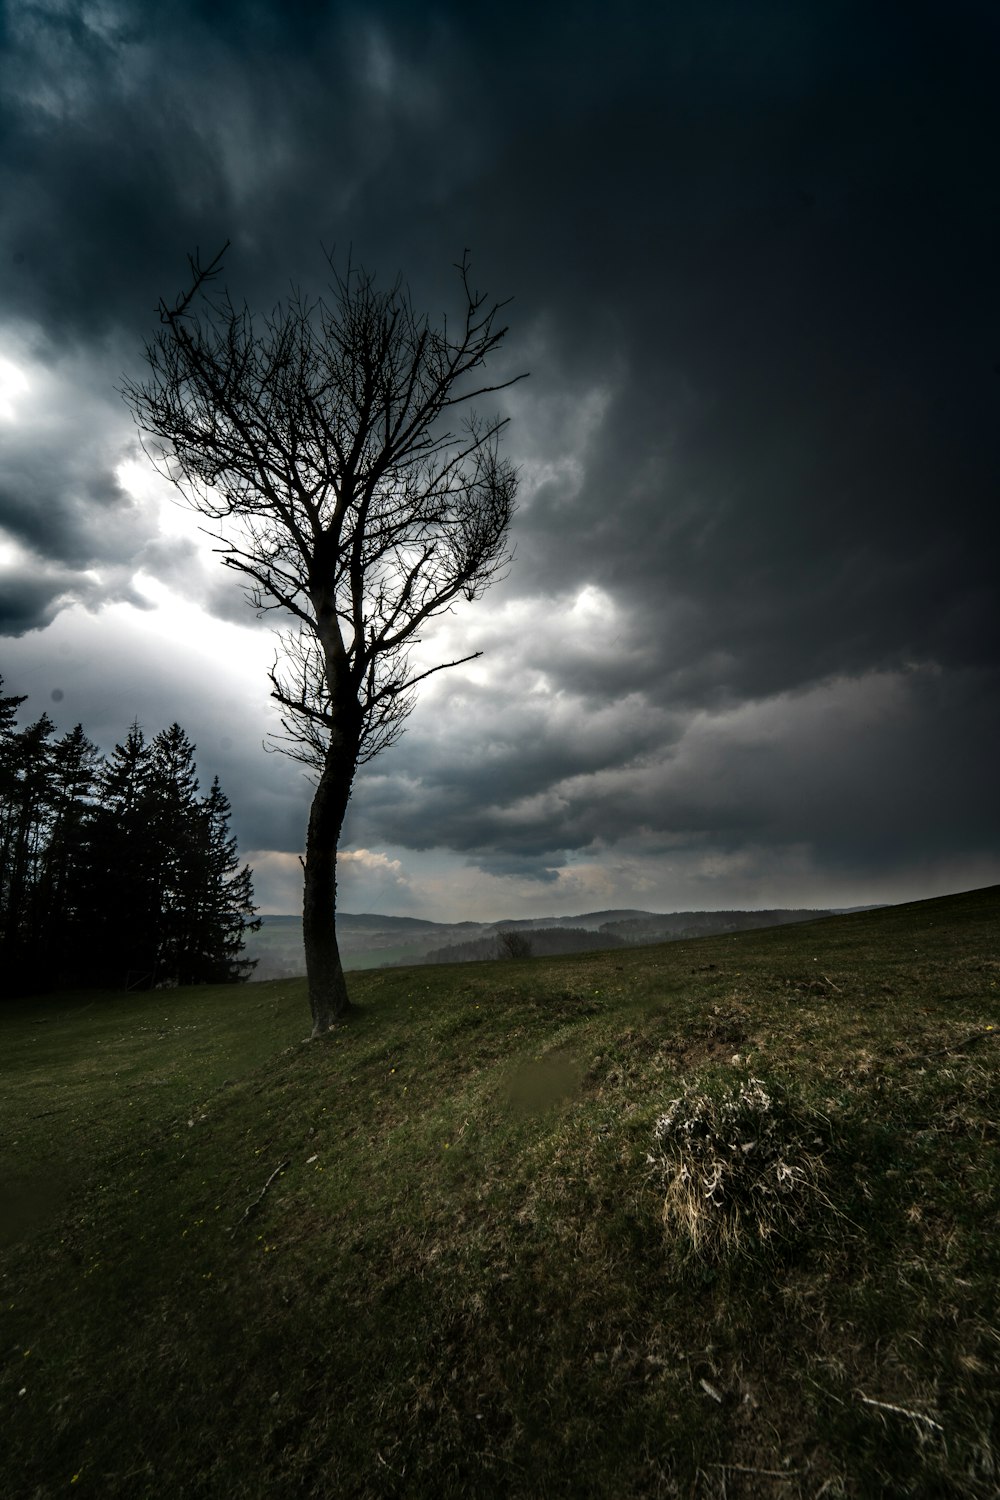 leafless tree on green grass field under gray clouds